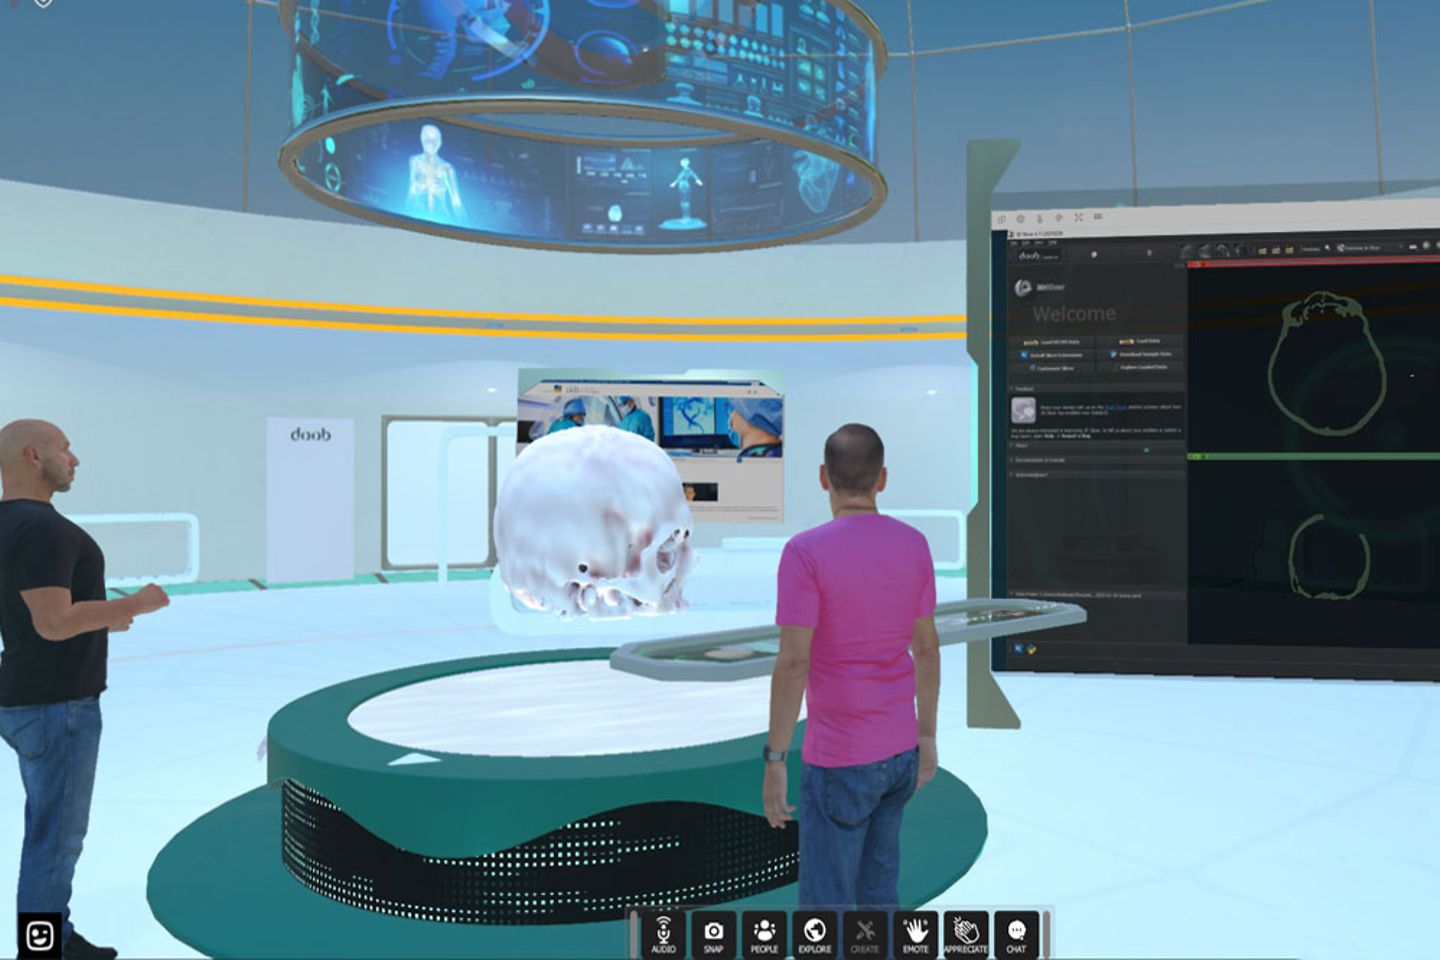 Virtual representation of an operating room with a human skull and two avatars